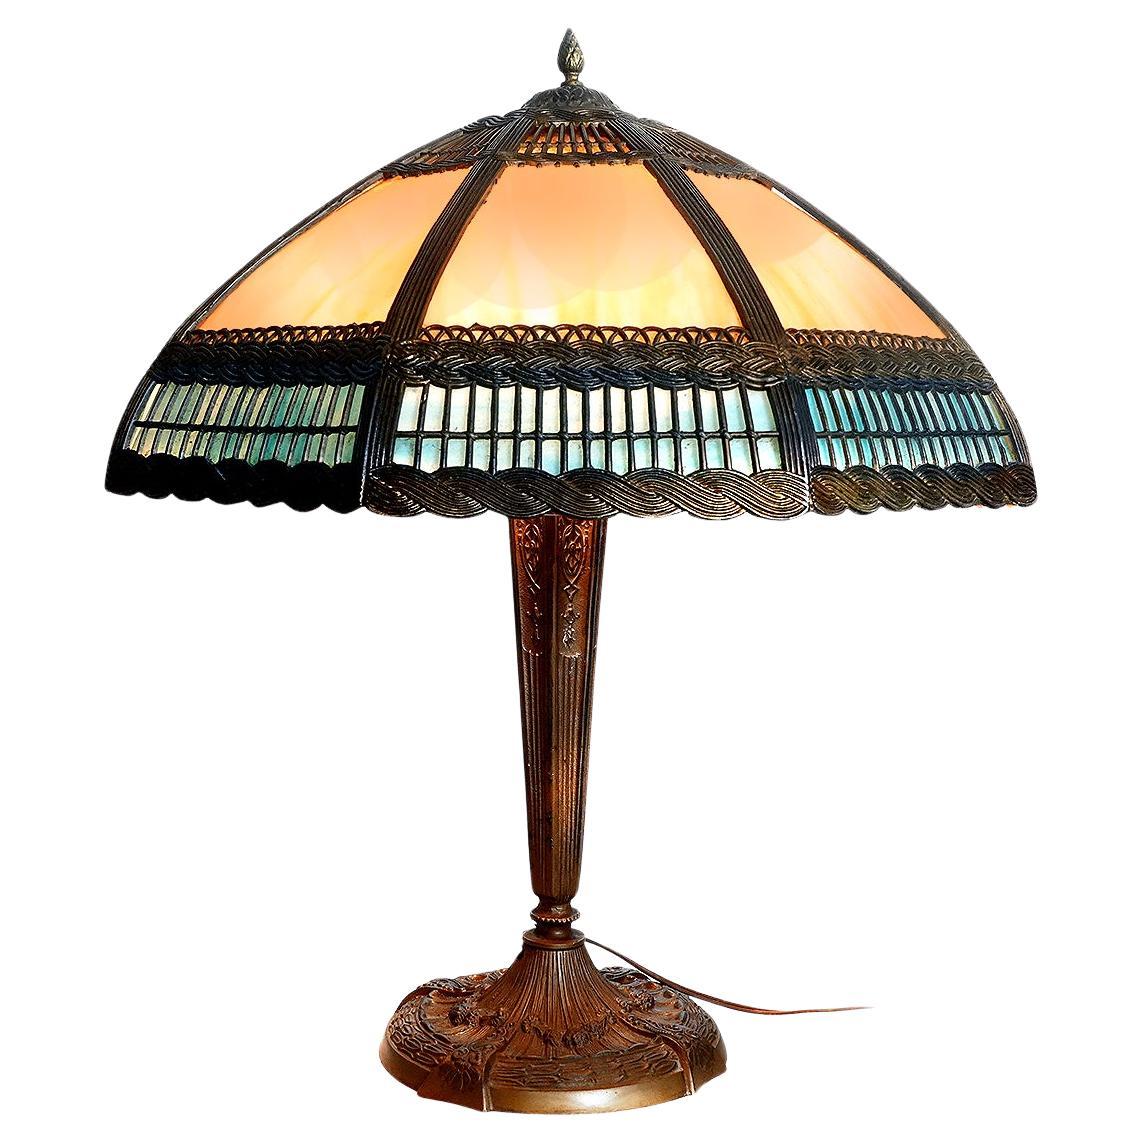 8 Panel Slump Glass Table Lamp with Stick and Rope Filigree Overlay